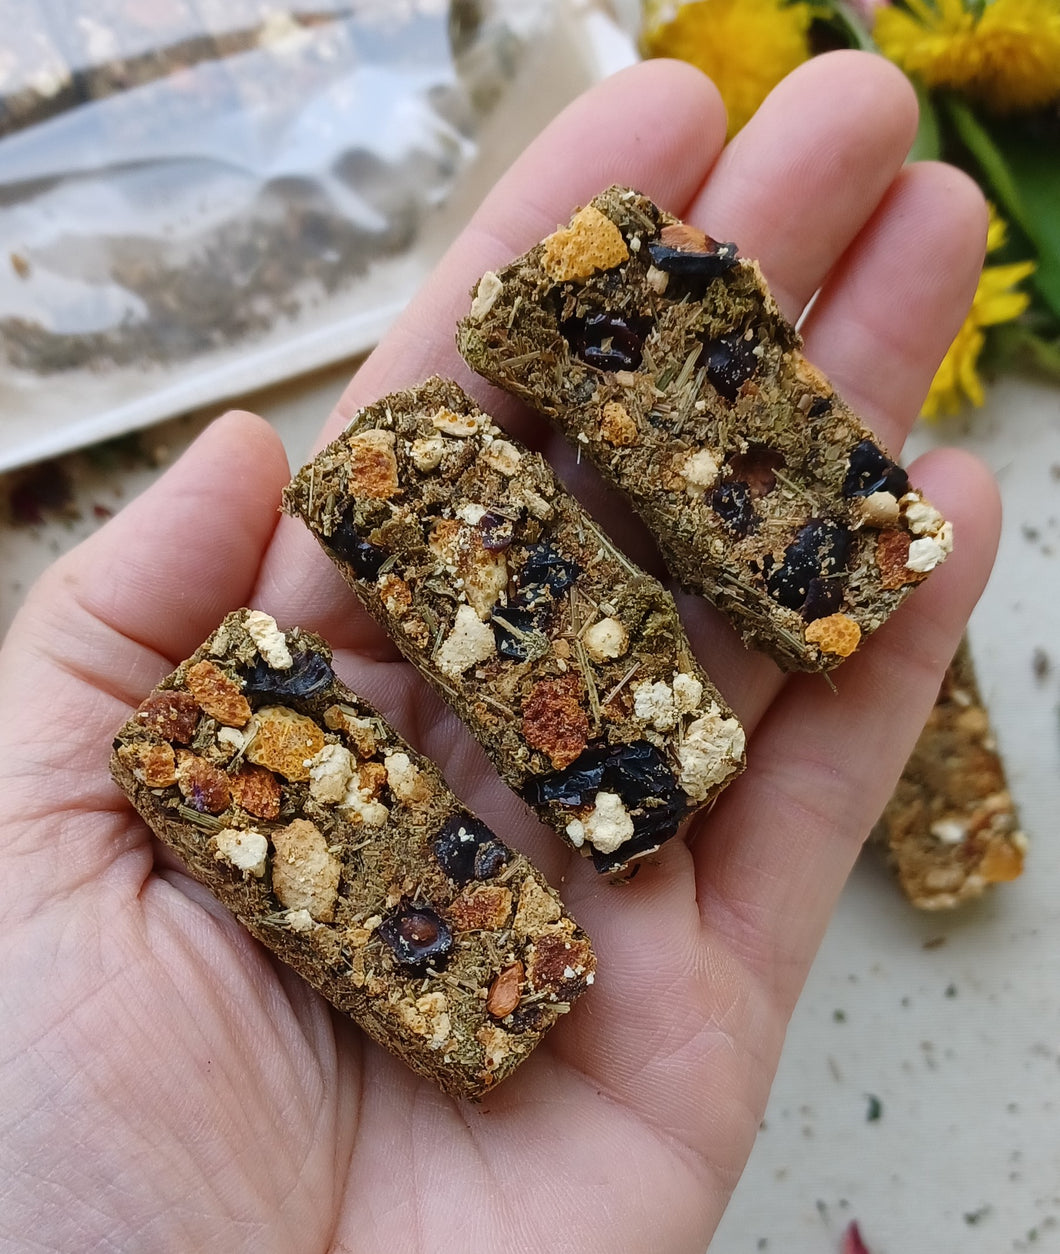 “Completely Crazy” Vitamin C and Antioxidant Bars